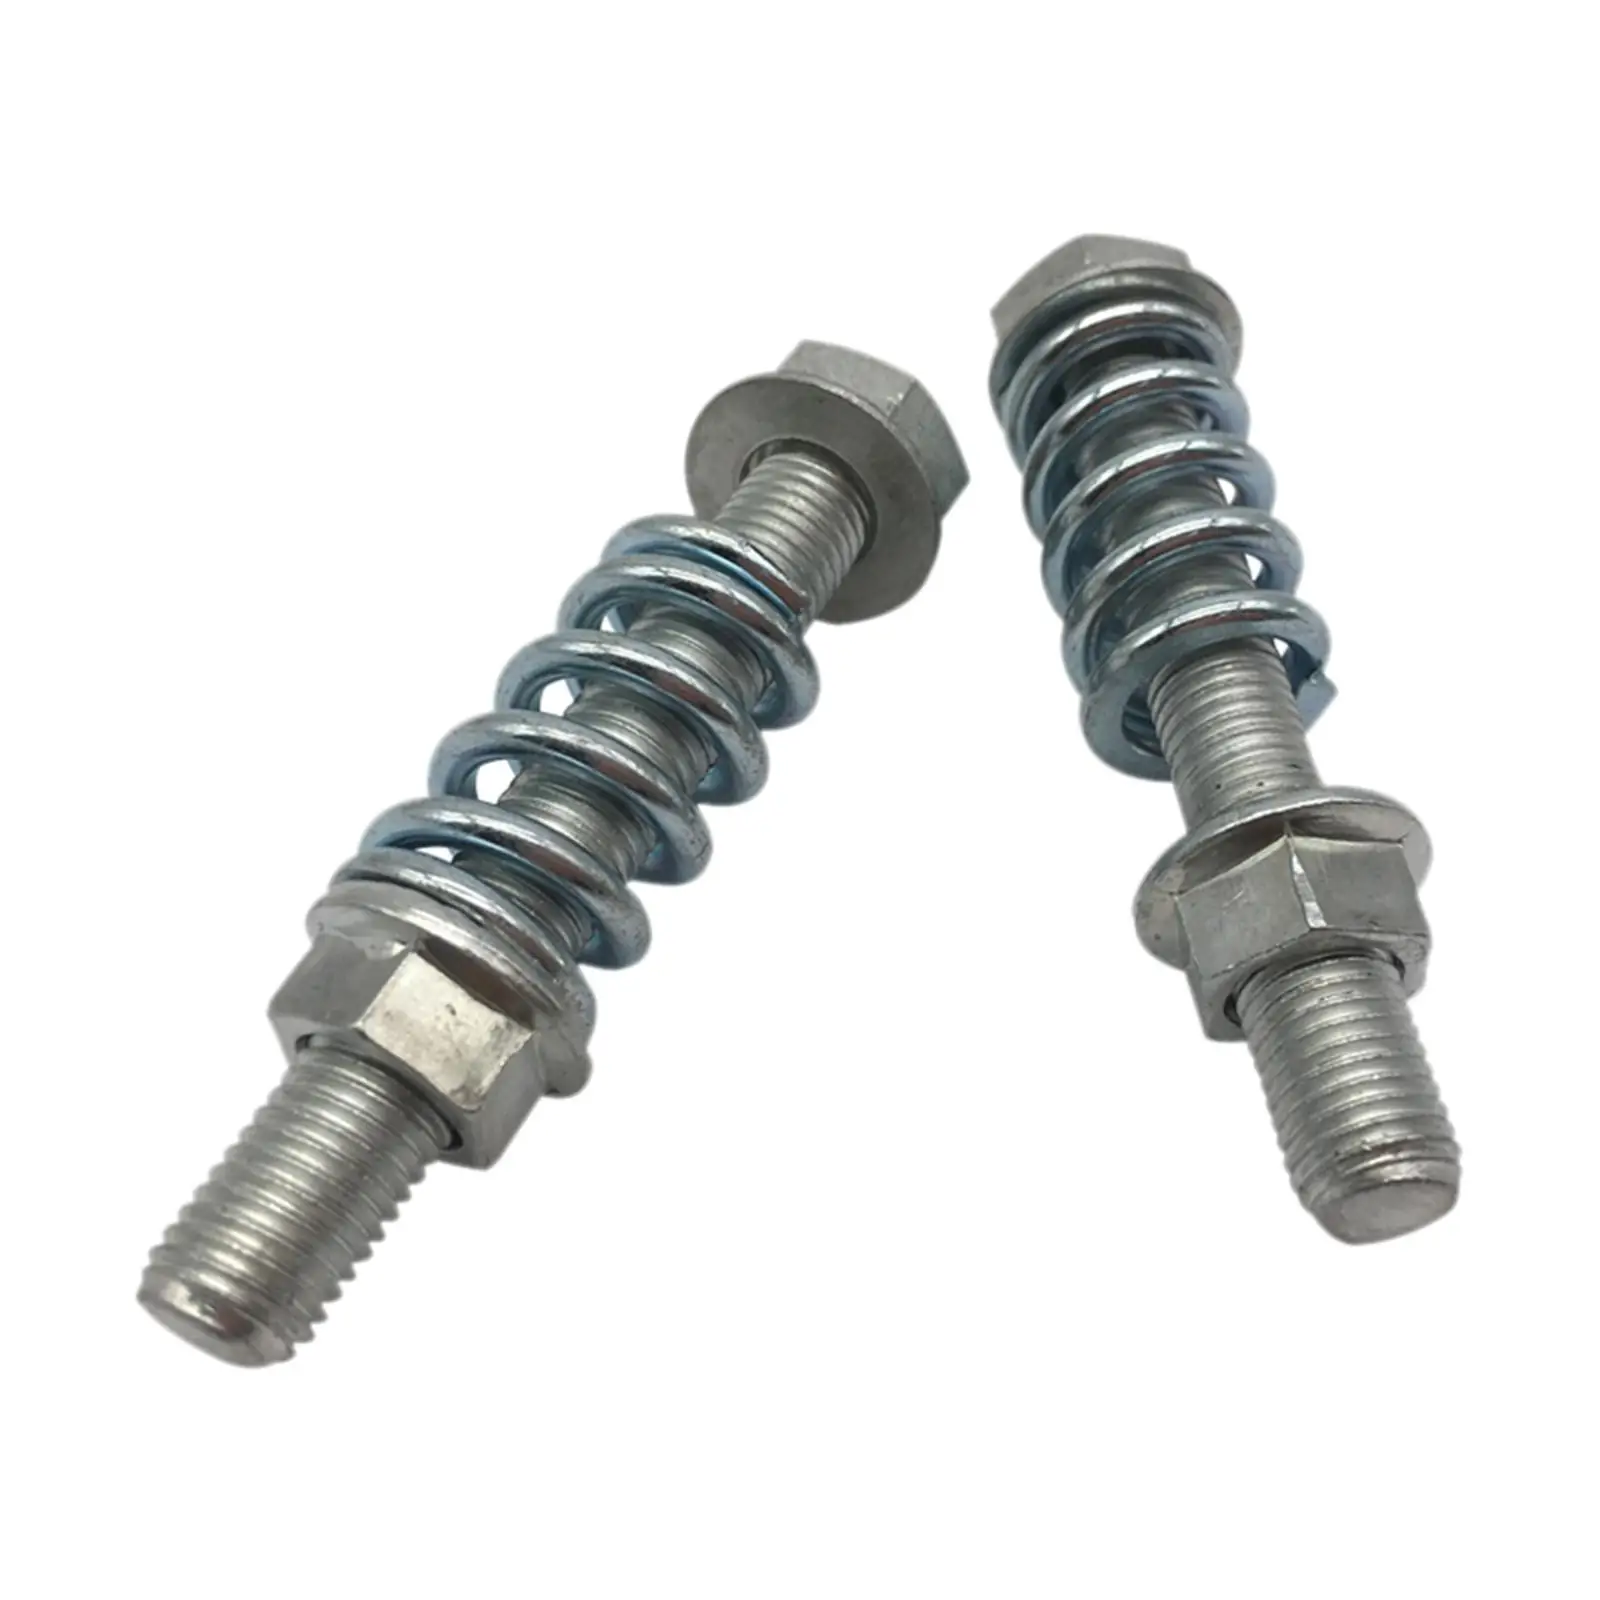 210x1.25 Exhaust And Spring Stud Set Repair Replacement Parts